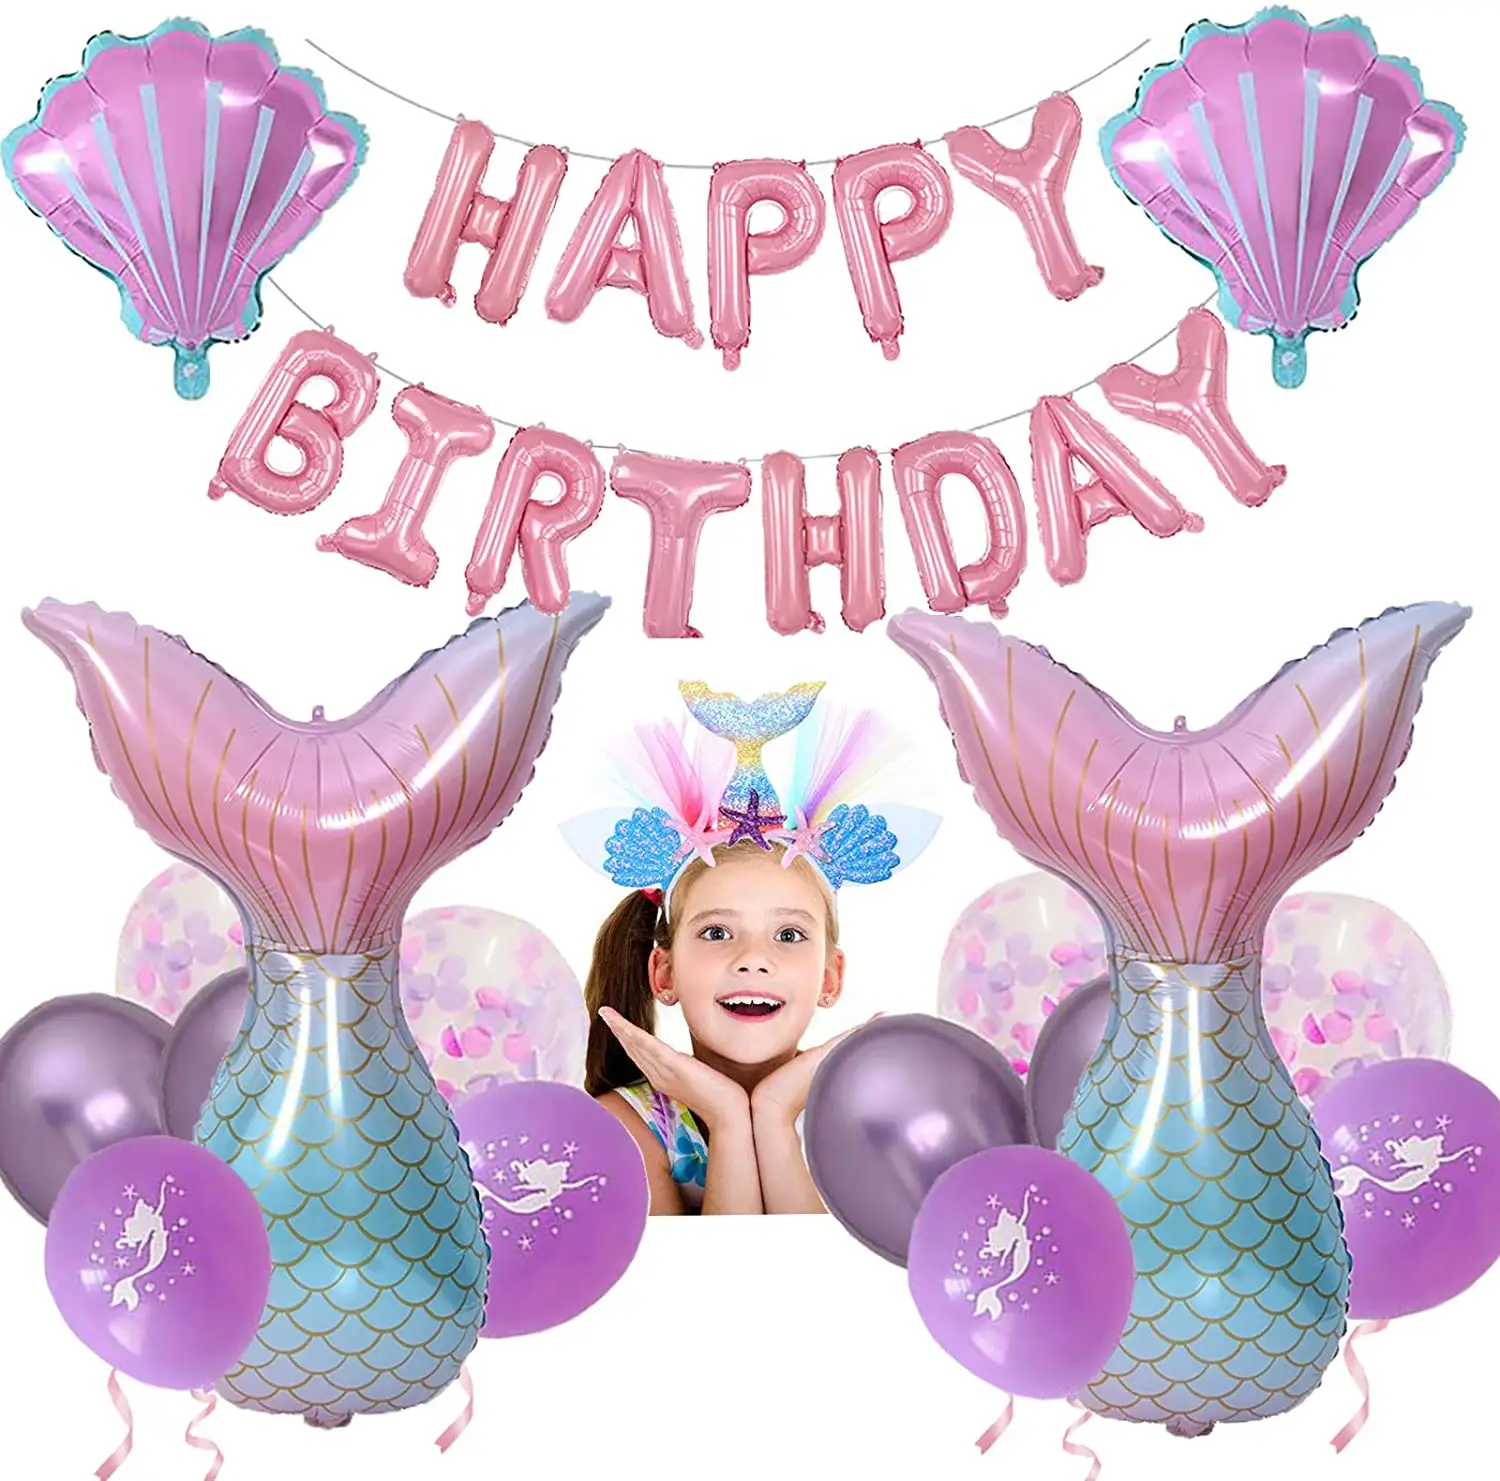 34 Pack Mermaid themed Happy Birthday Decorations for Kids and Adult Birthday Party